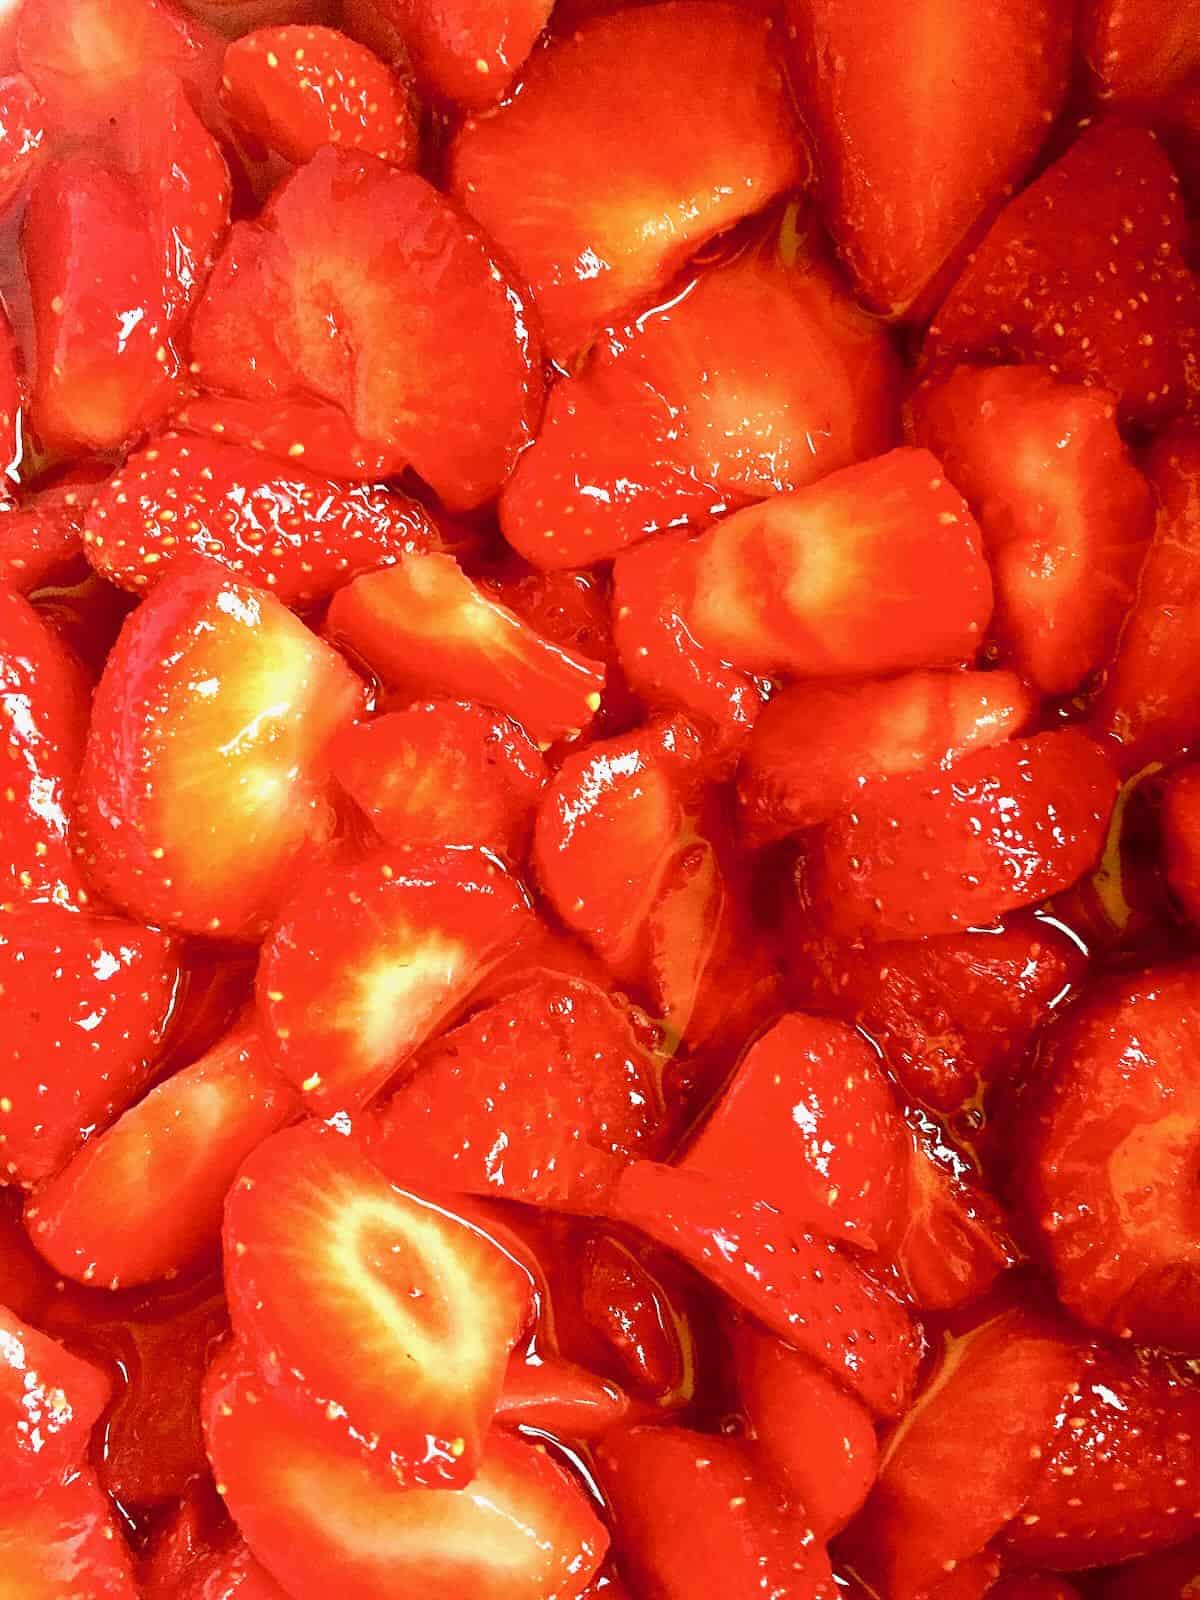 Sliced strawberries that have been macerated covered in juice. 